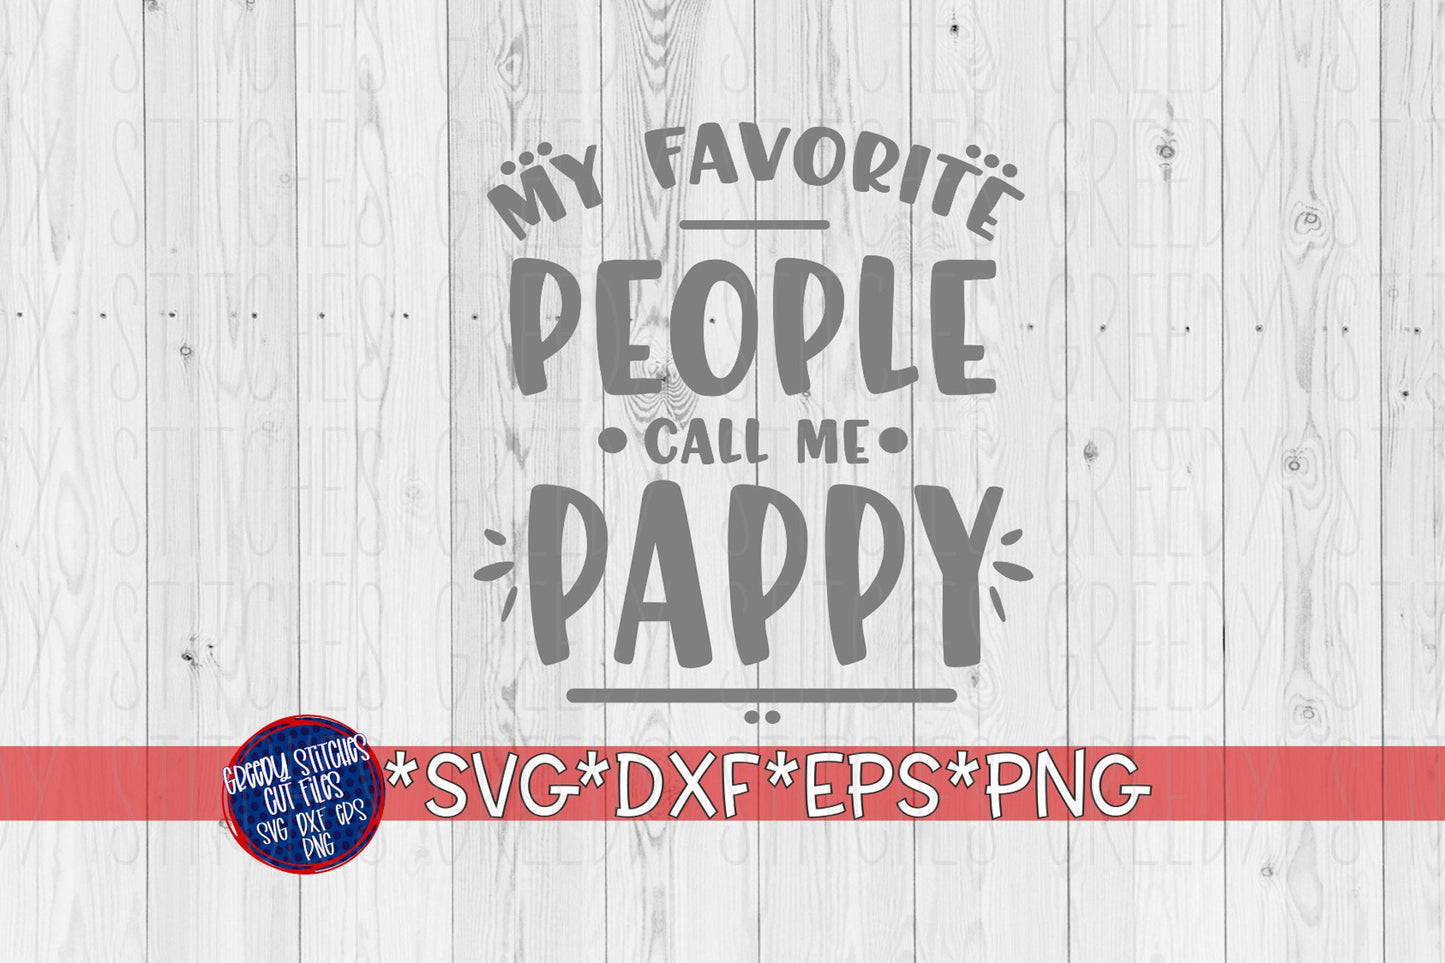 Father&#39;s Day SVG | My Favorite People Call Me Pappy SVG | Pappy svg, dxf eps png.  Pappy SVG | Father&#39;s Day SvG | Instant Download Cut File